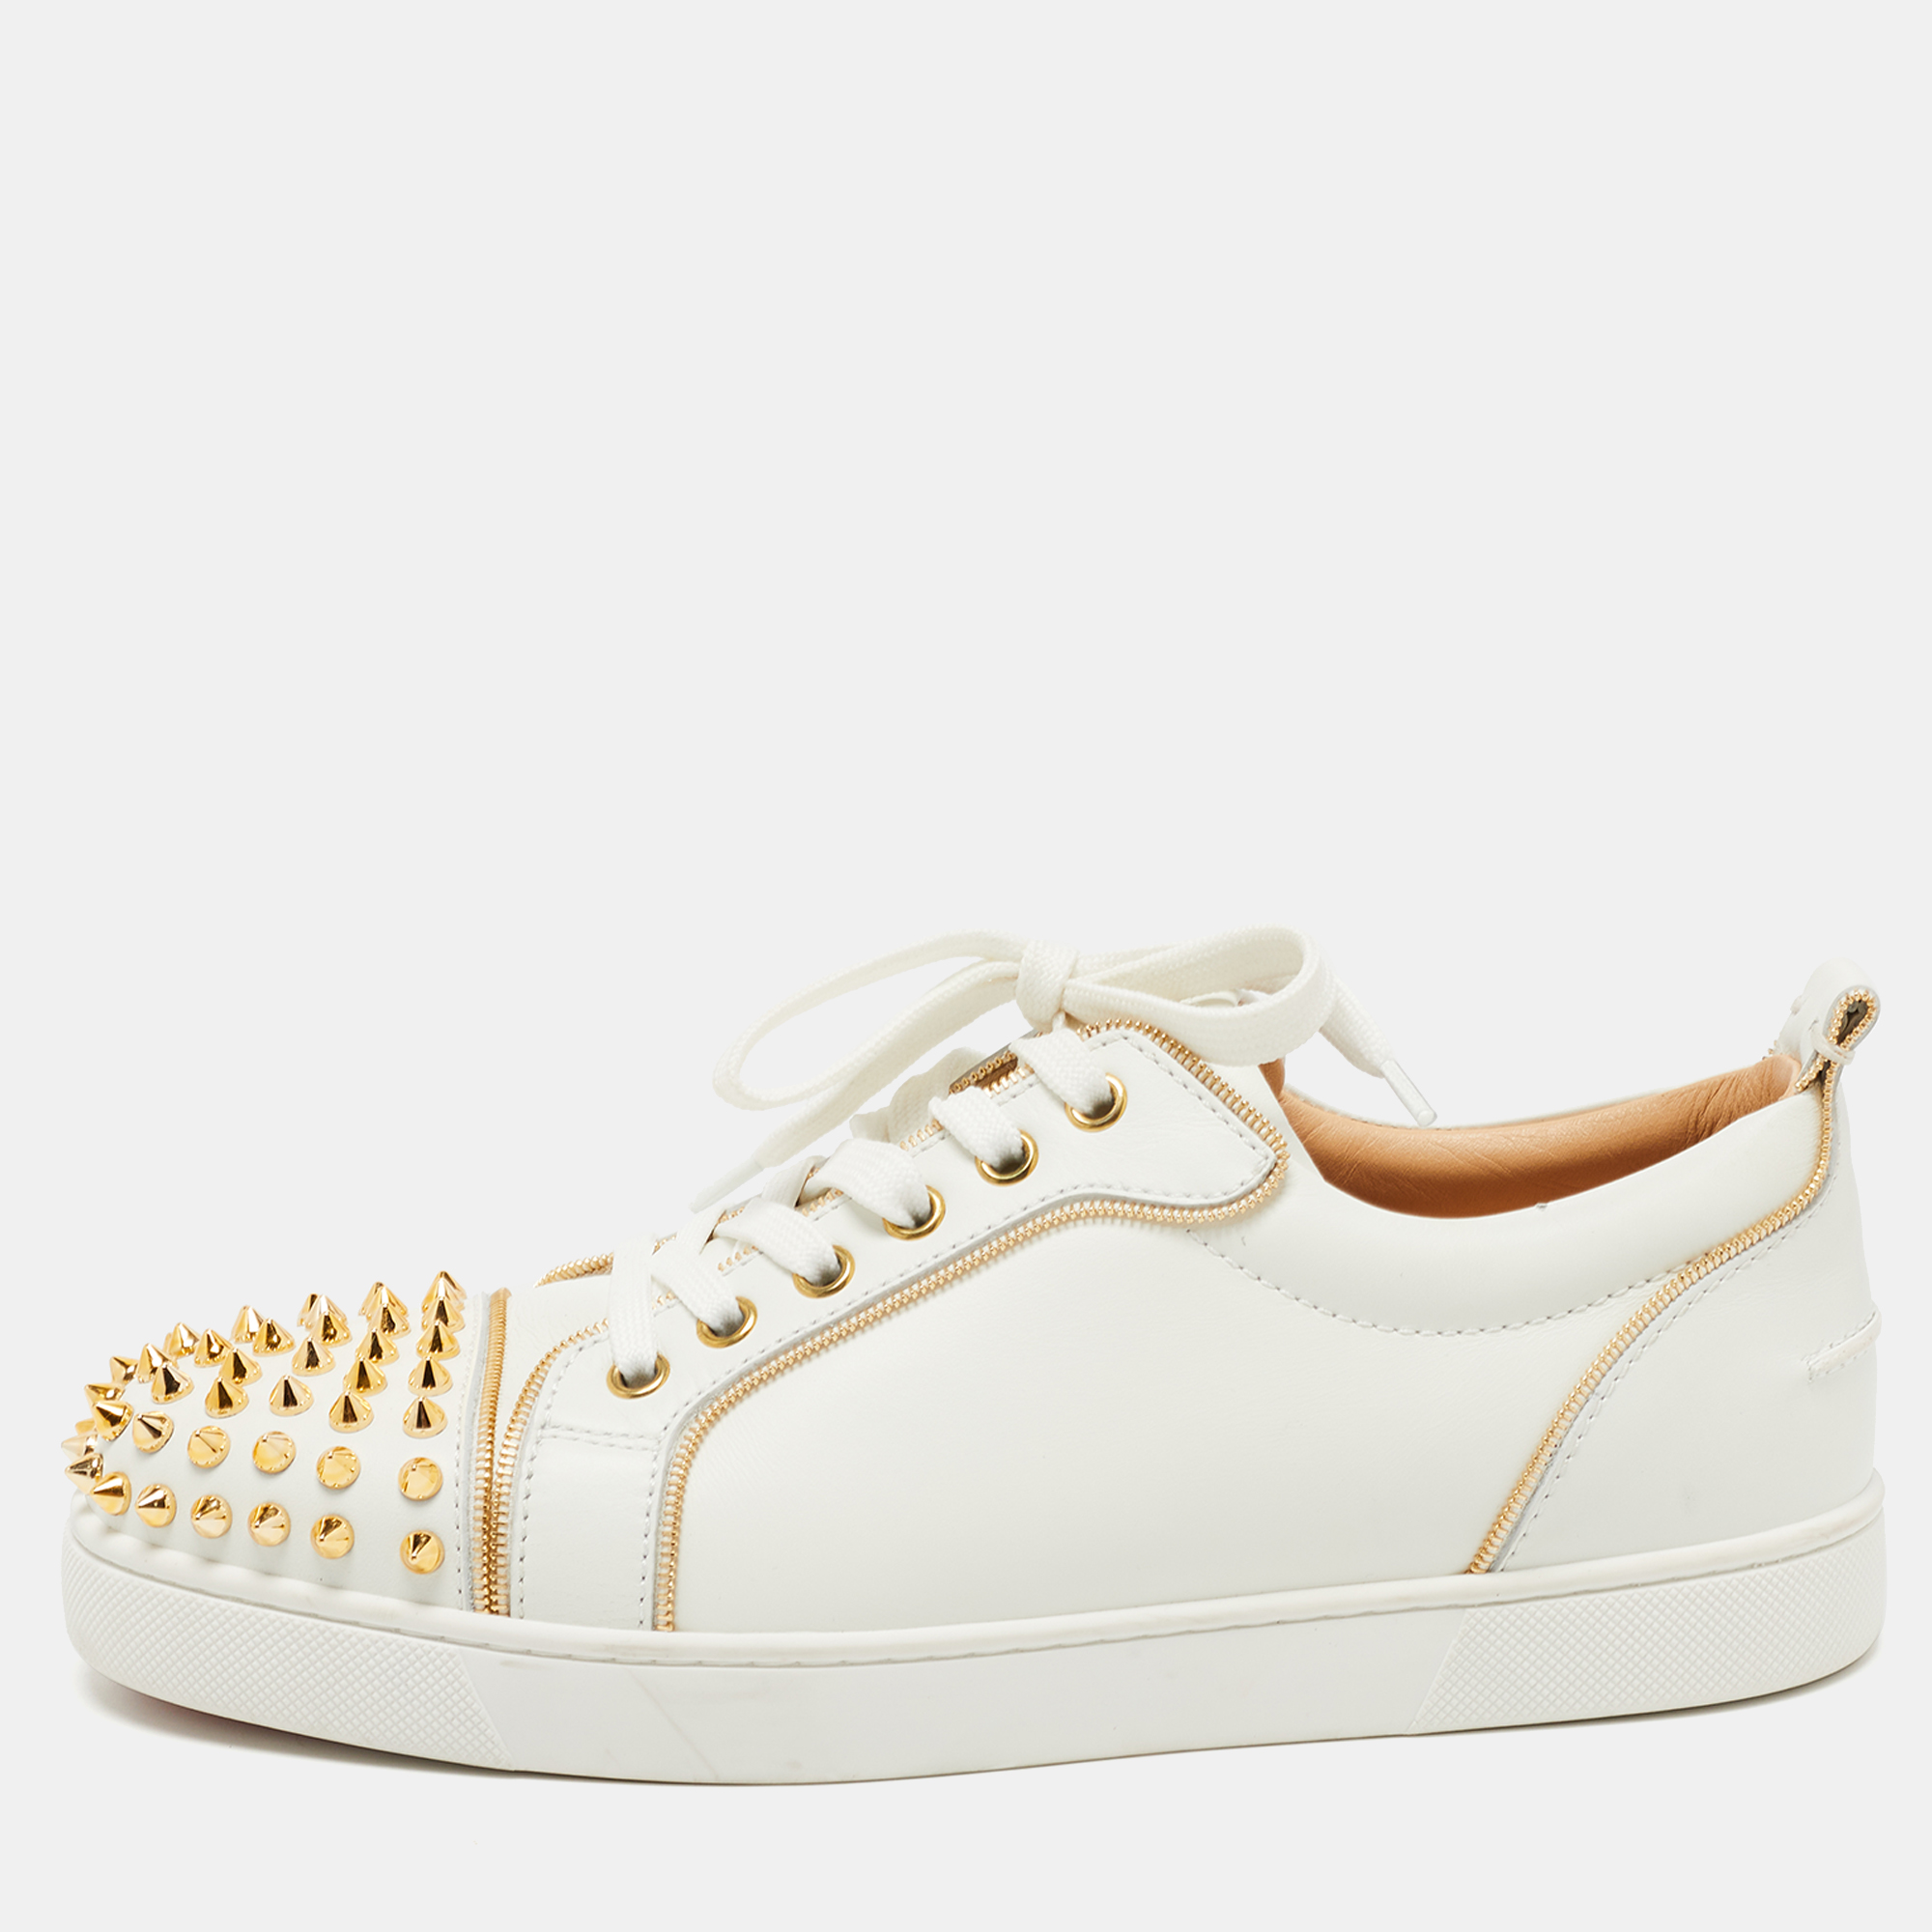 Pre-owned Christian Louboutin White Leather Vieira 2 Spike Low Top Sneakers Size 40